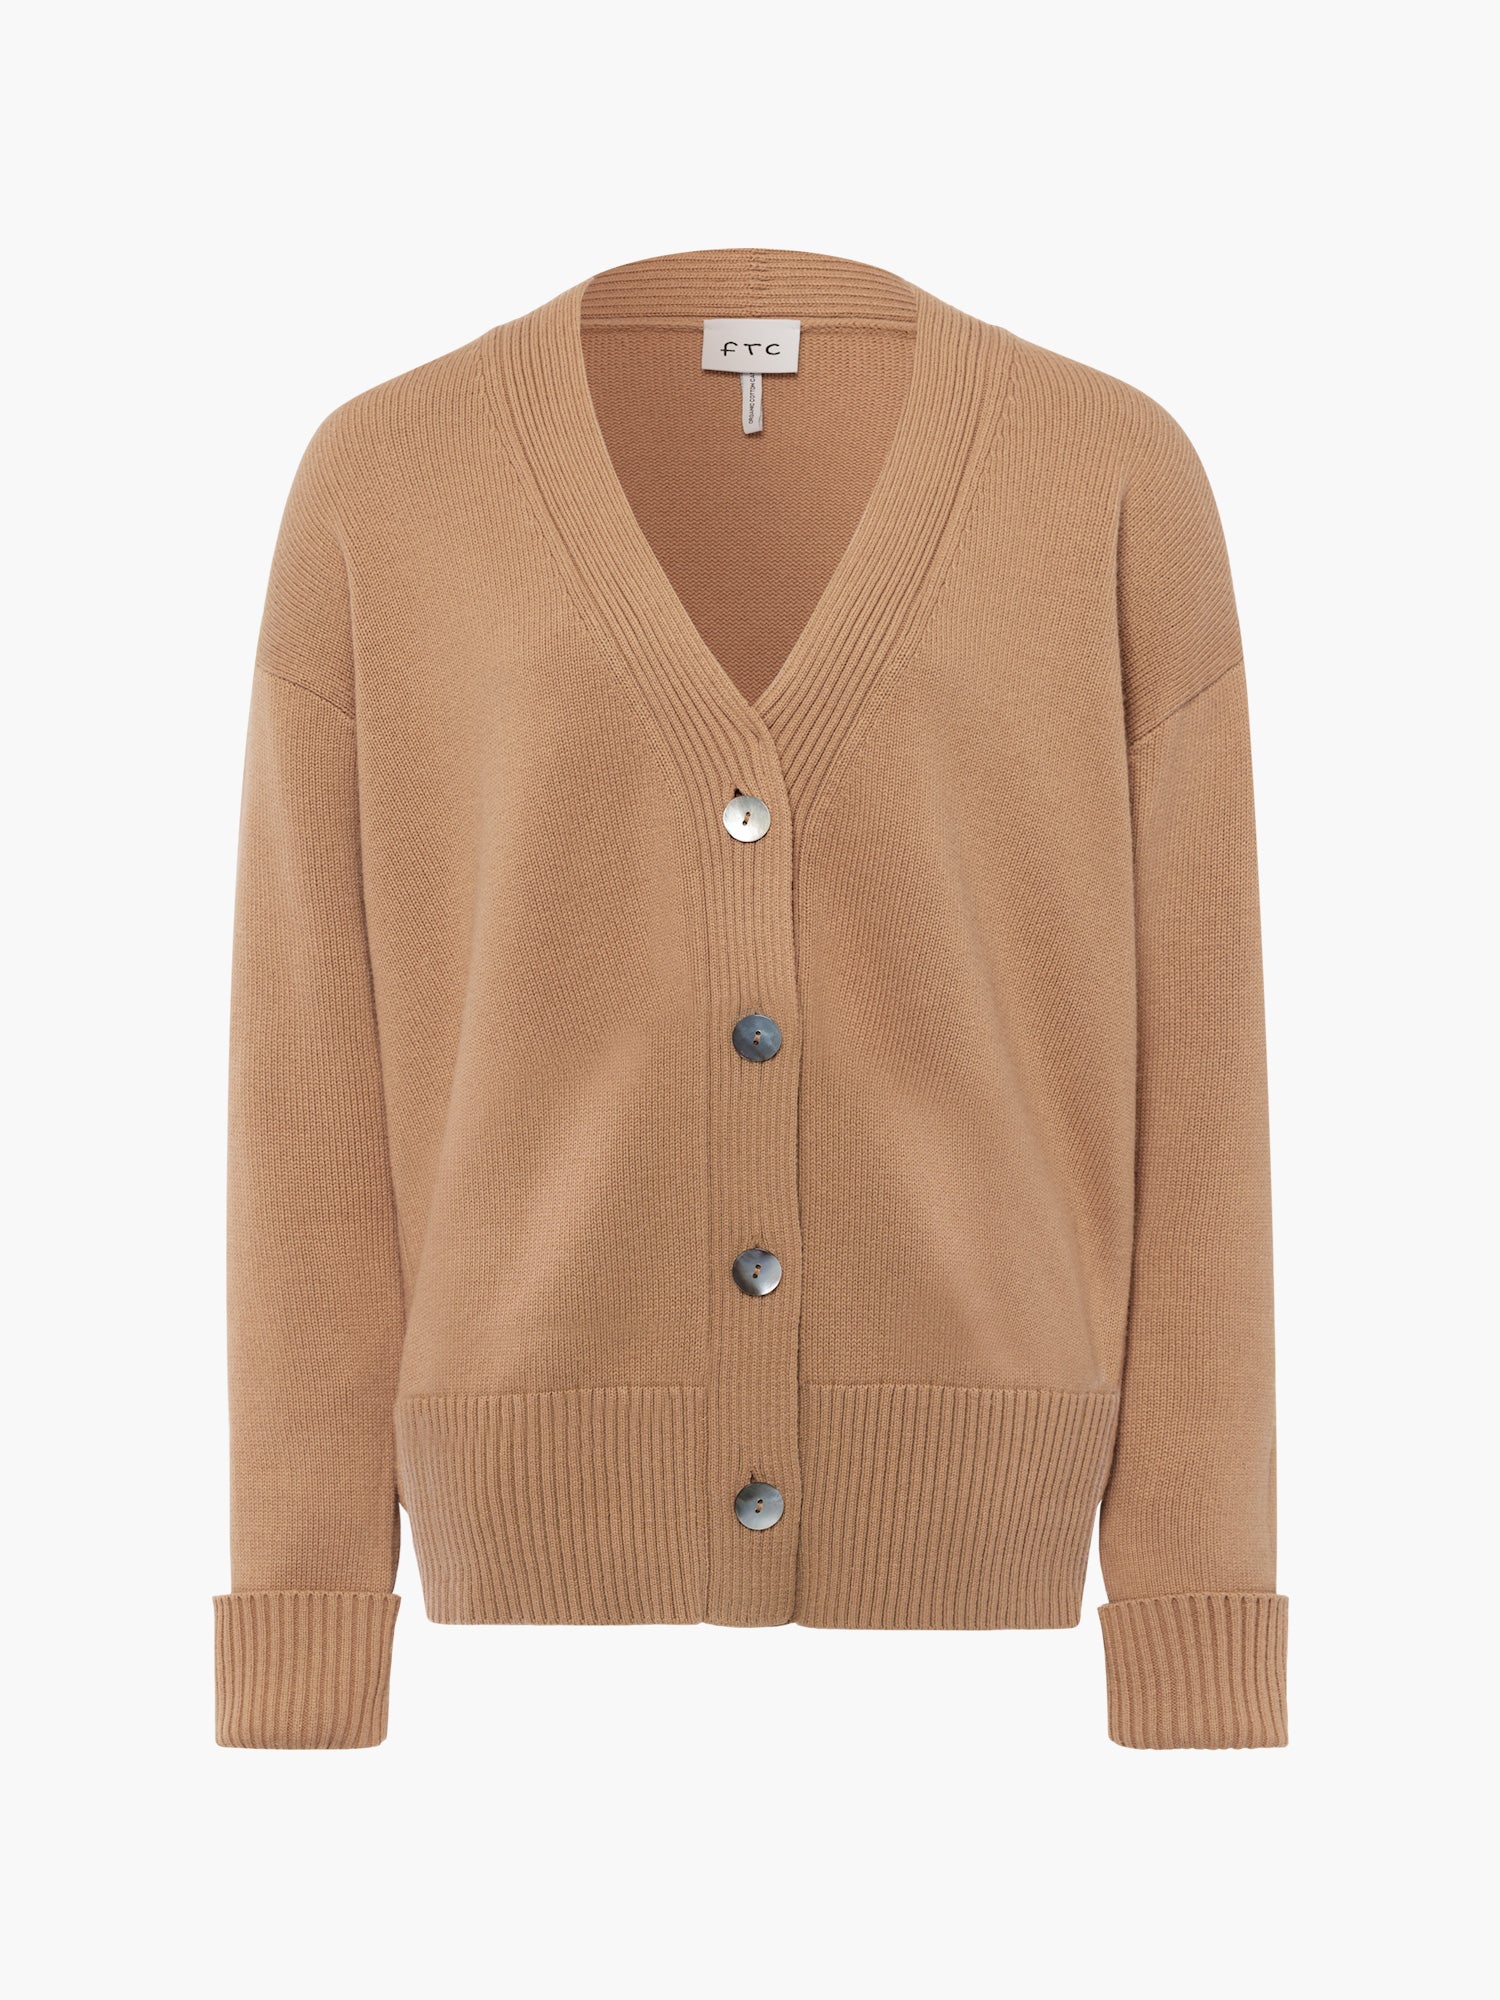 FTC-Cashmere-OUTLET-SALE-Cardigan-VN-Strick-ARCHIVE-COLLECTION_b77160f0-6ff3-4bb3-aedc-e4da14a83a9e.jpg